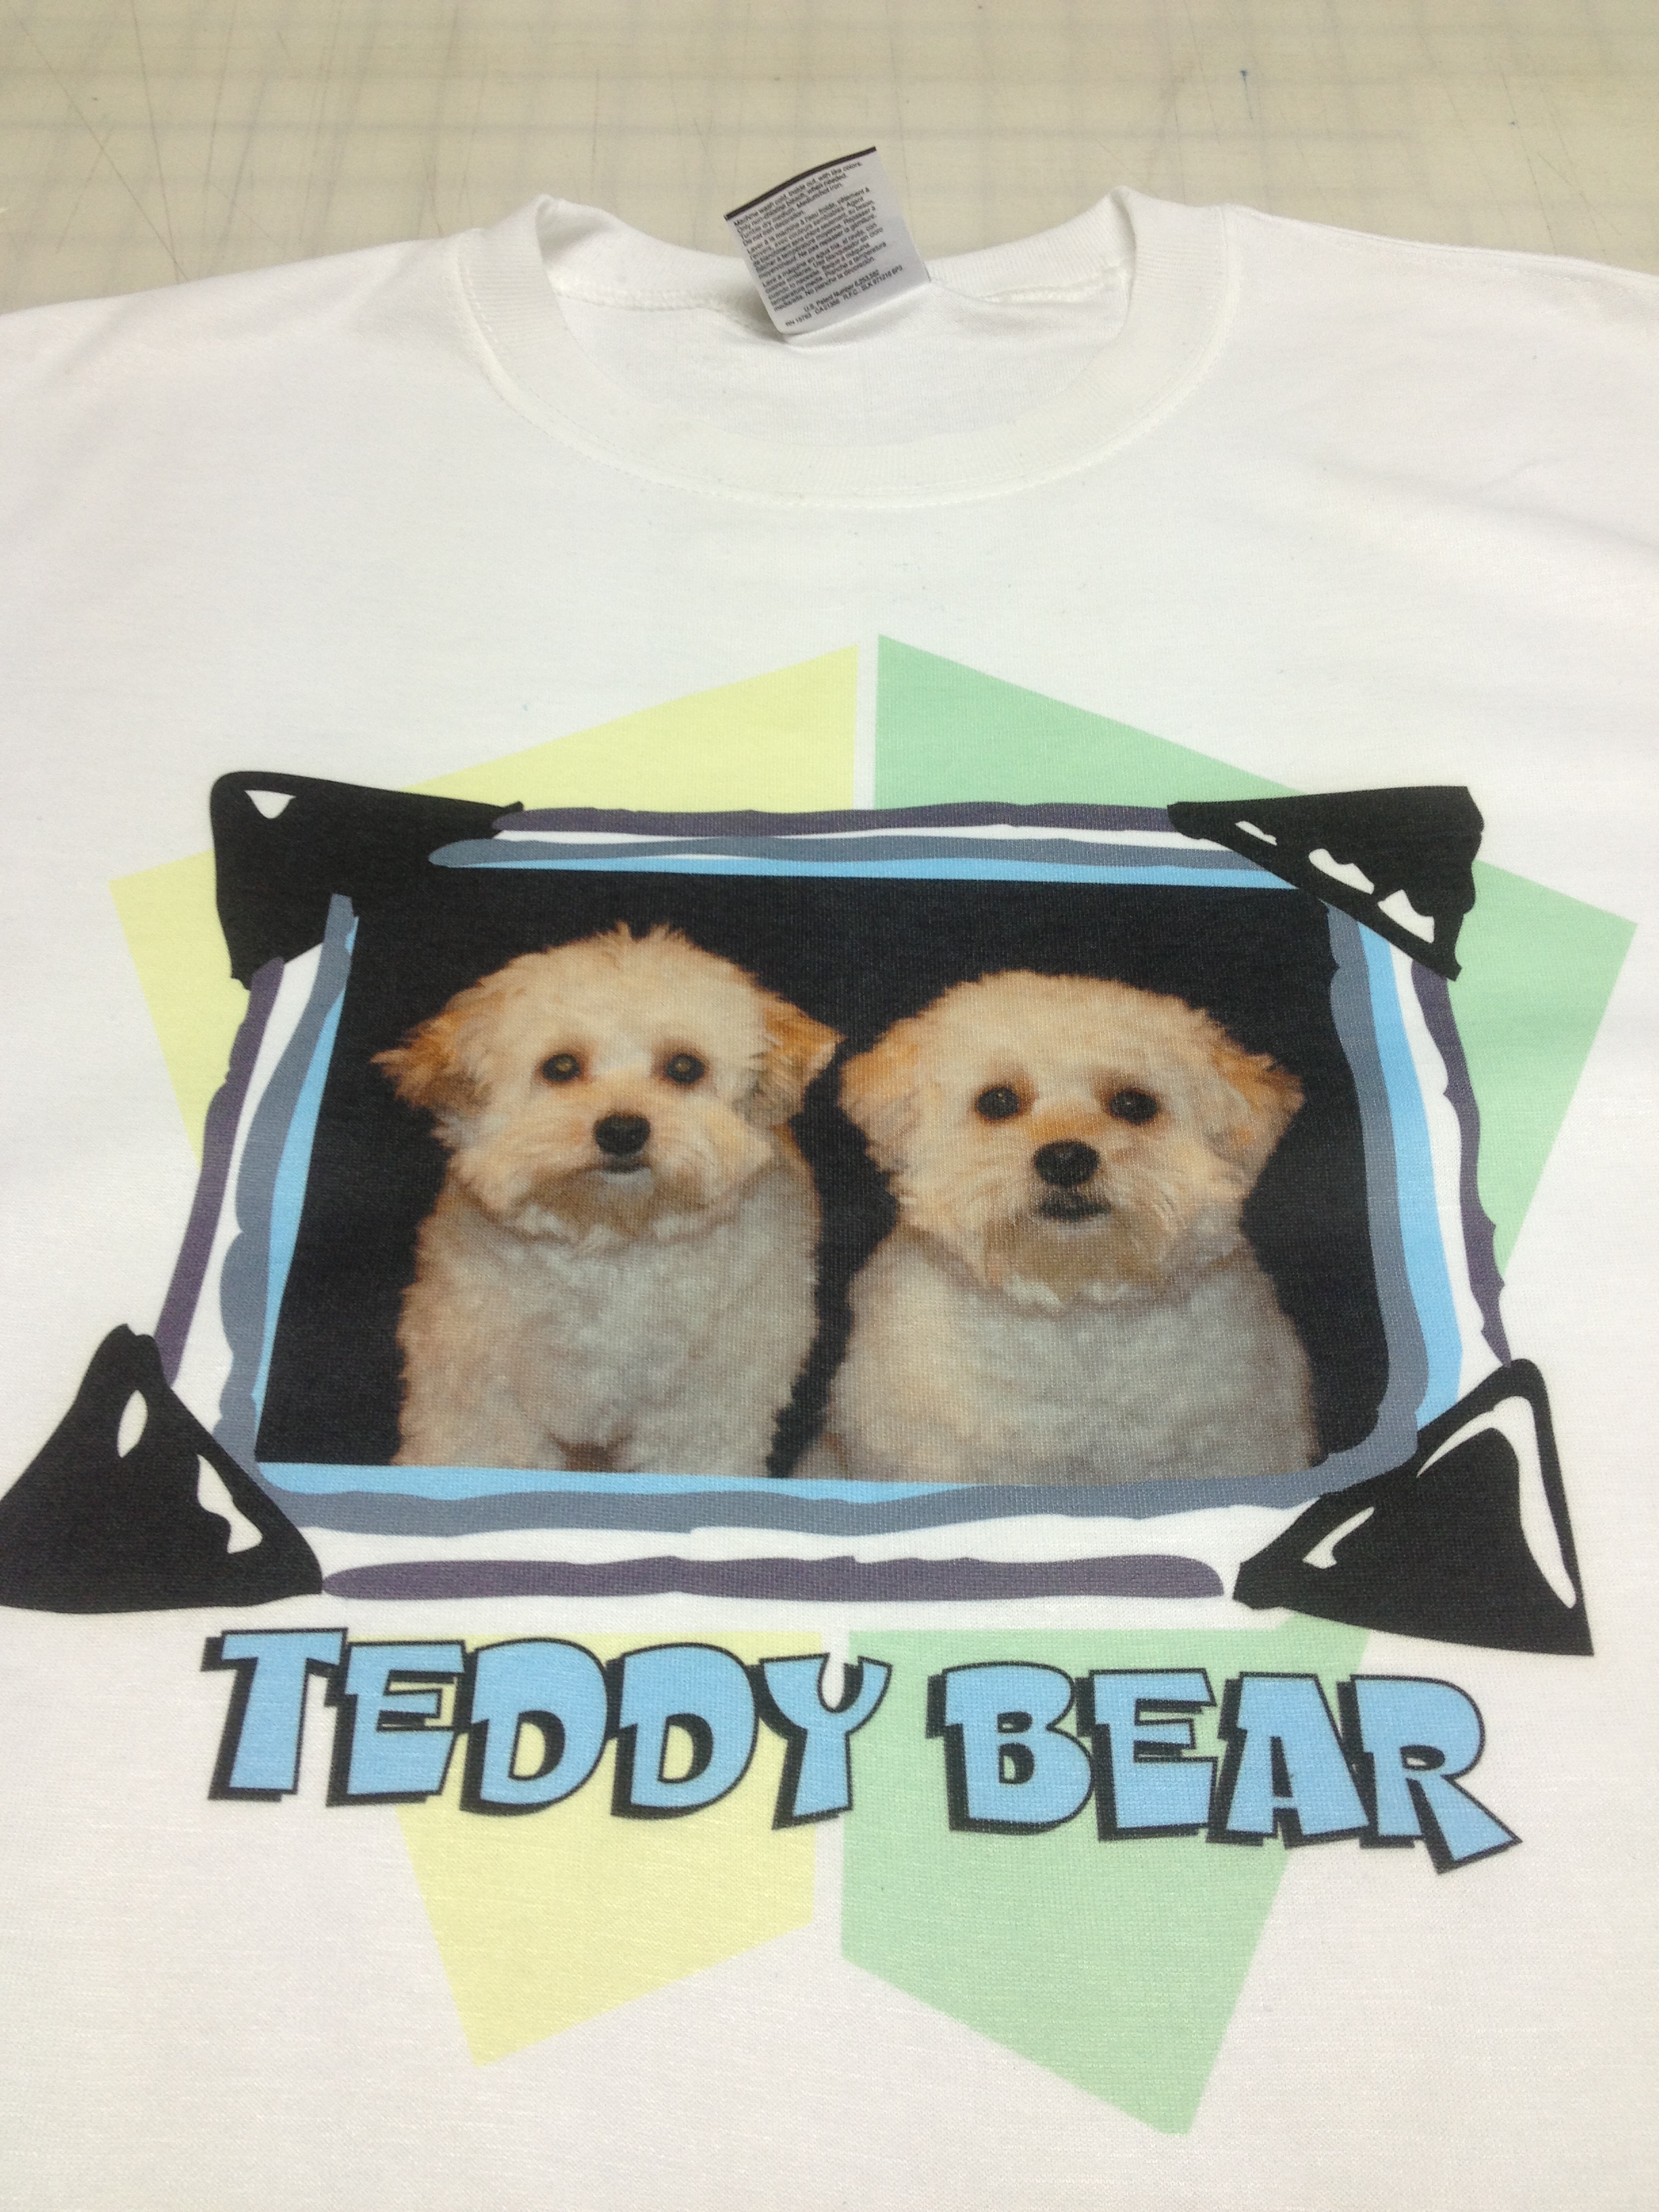 Tee Shirts made with sublimation printing